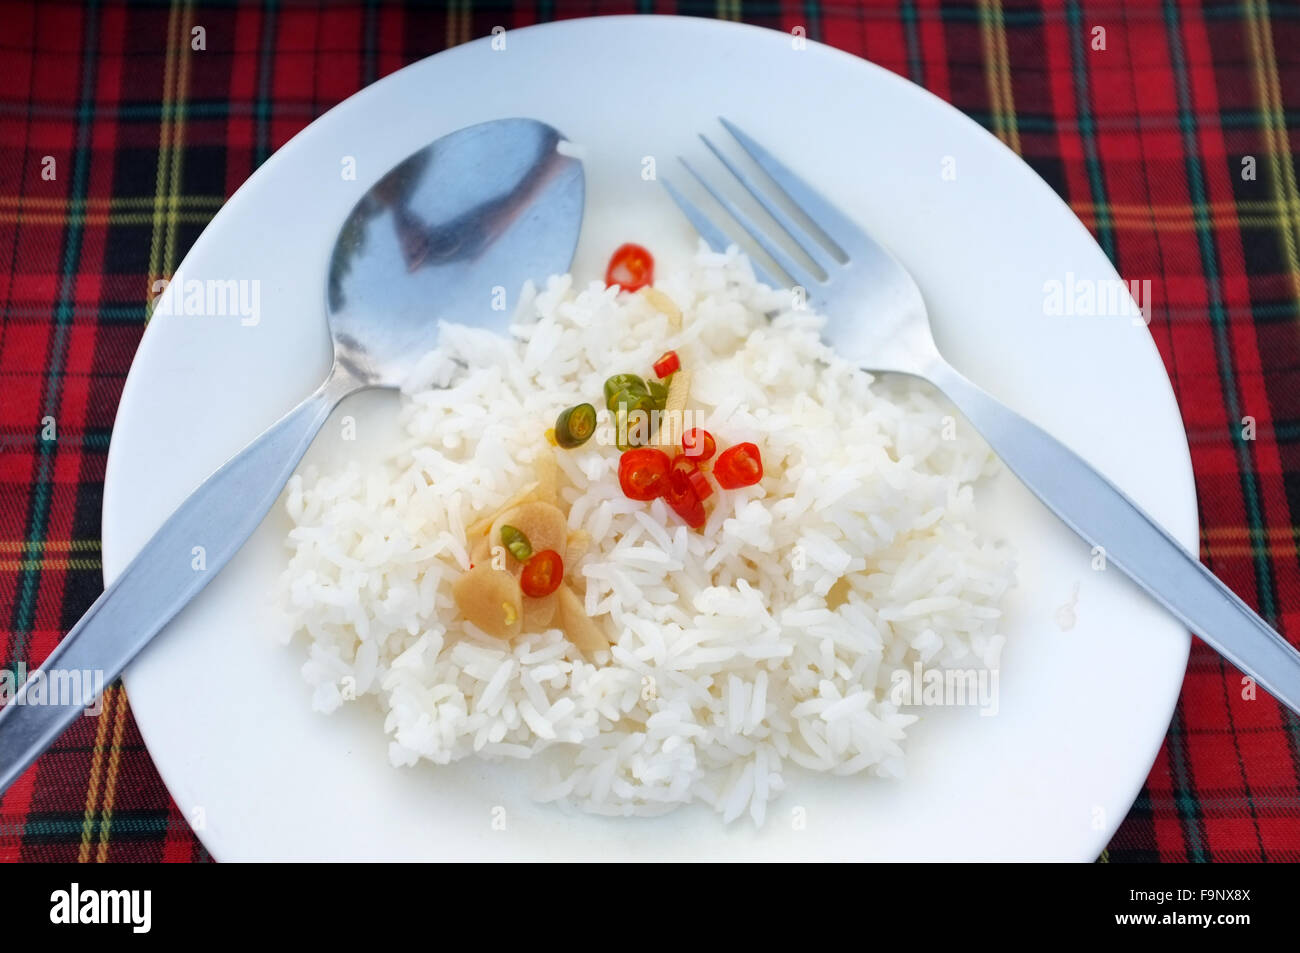 Boiled rice and chili on white dish with spoon and fork Stock Photo